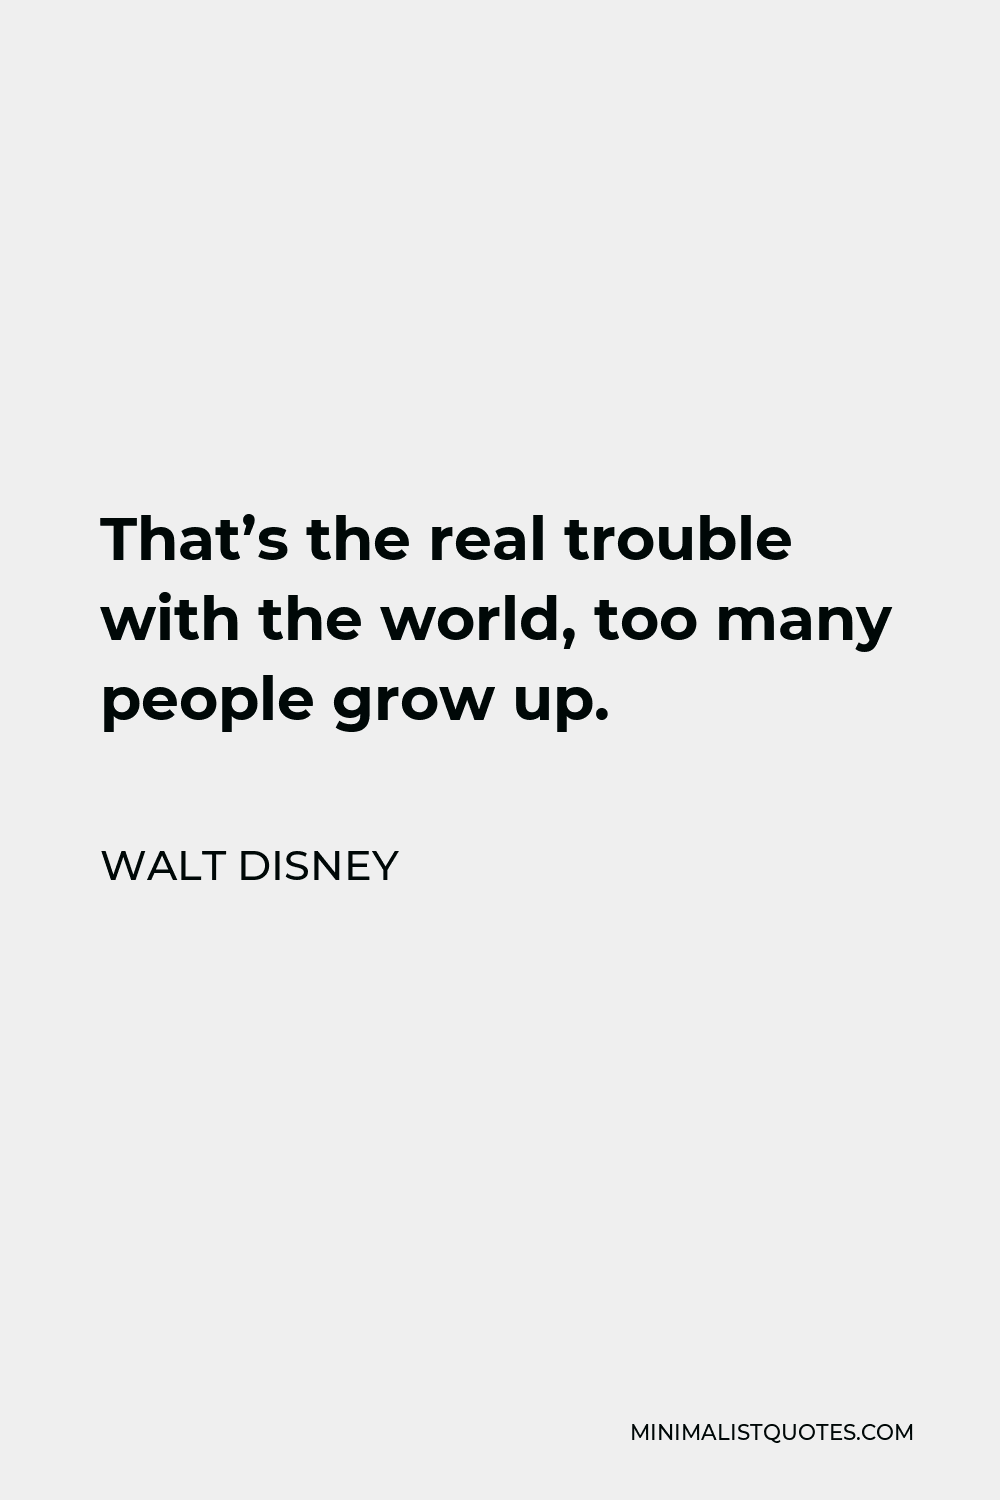 Walt Disney Quote: That's the real trouble with the world, too many ...